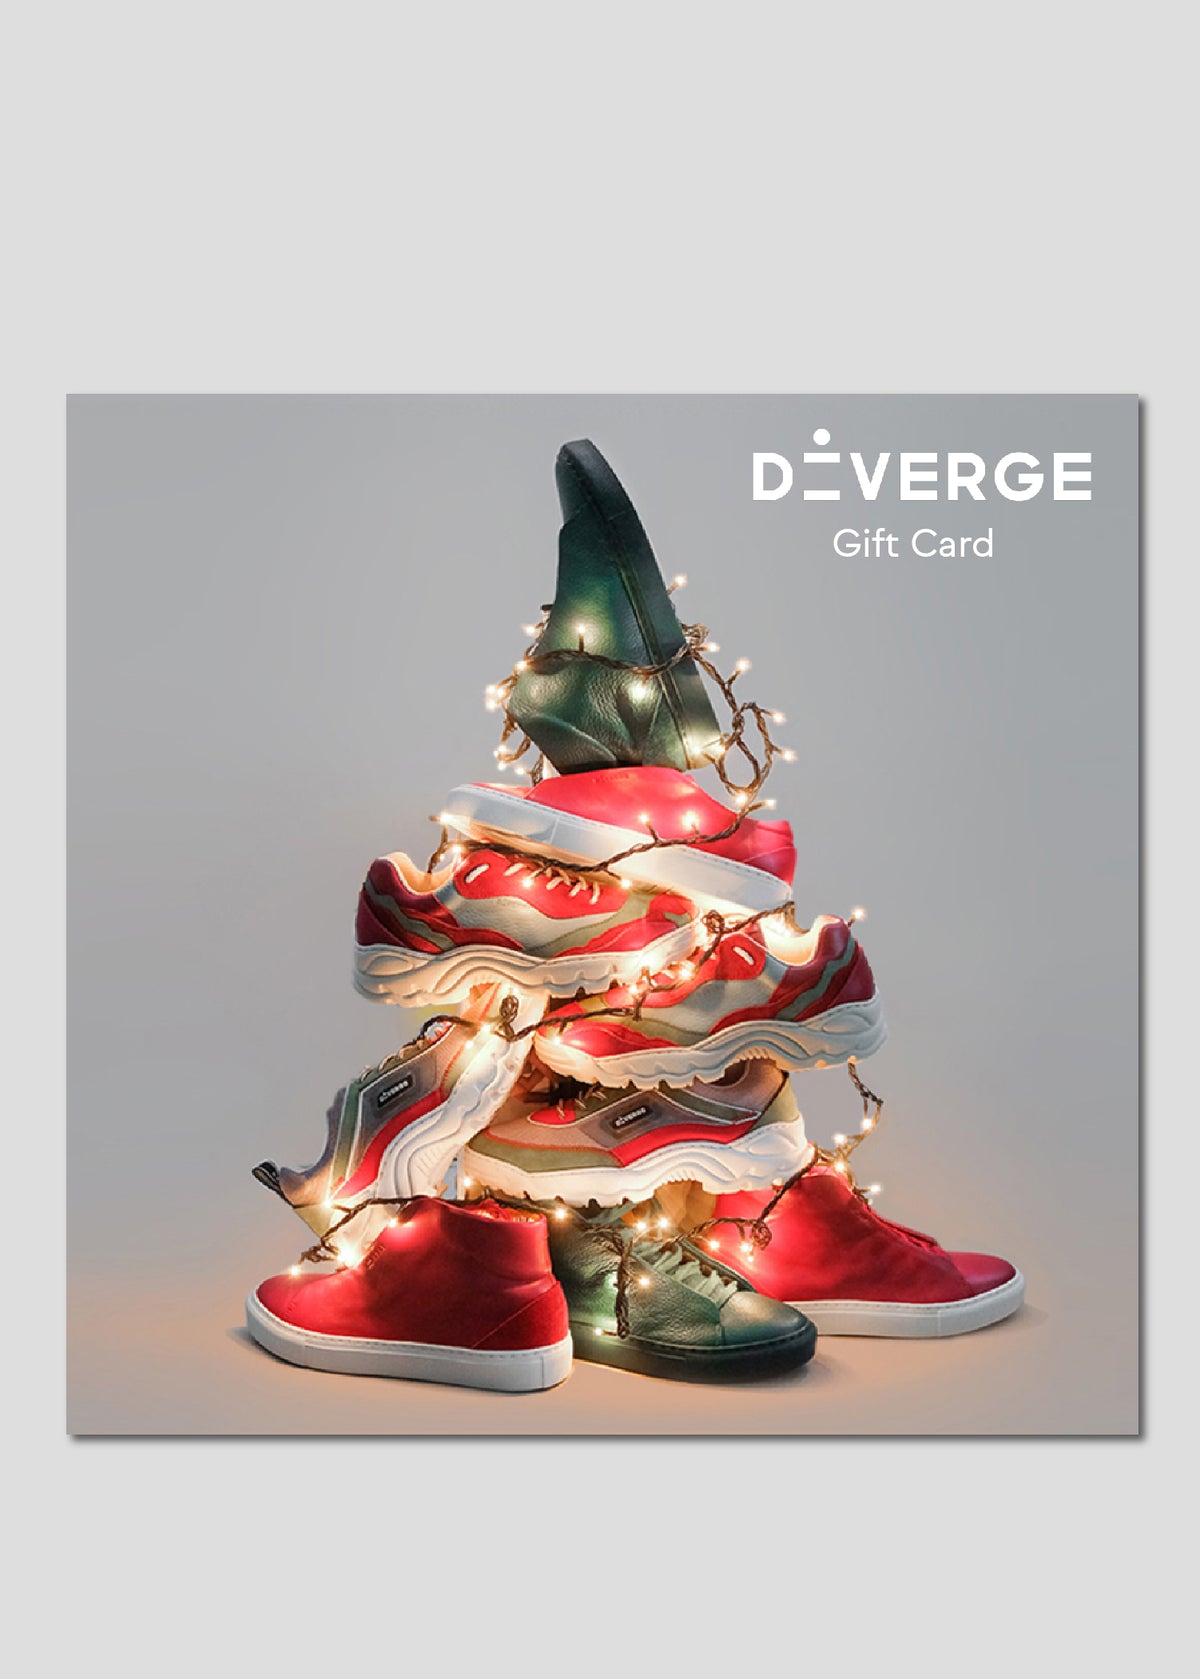 DiVERGE Gift Card